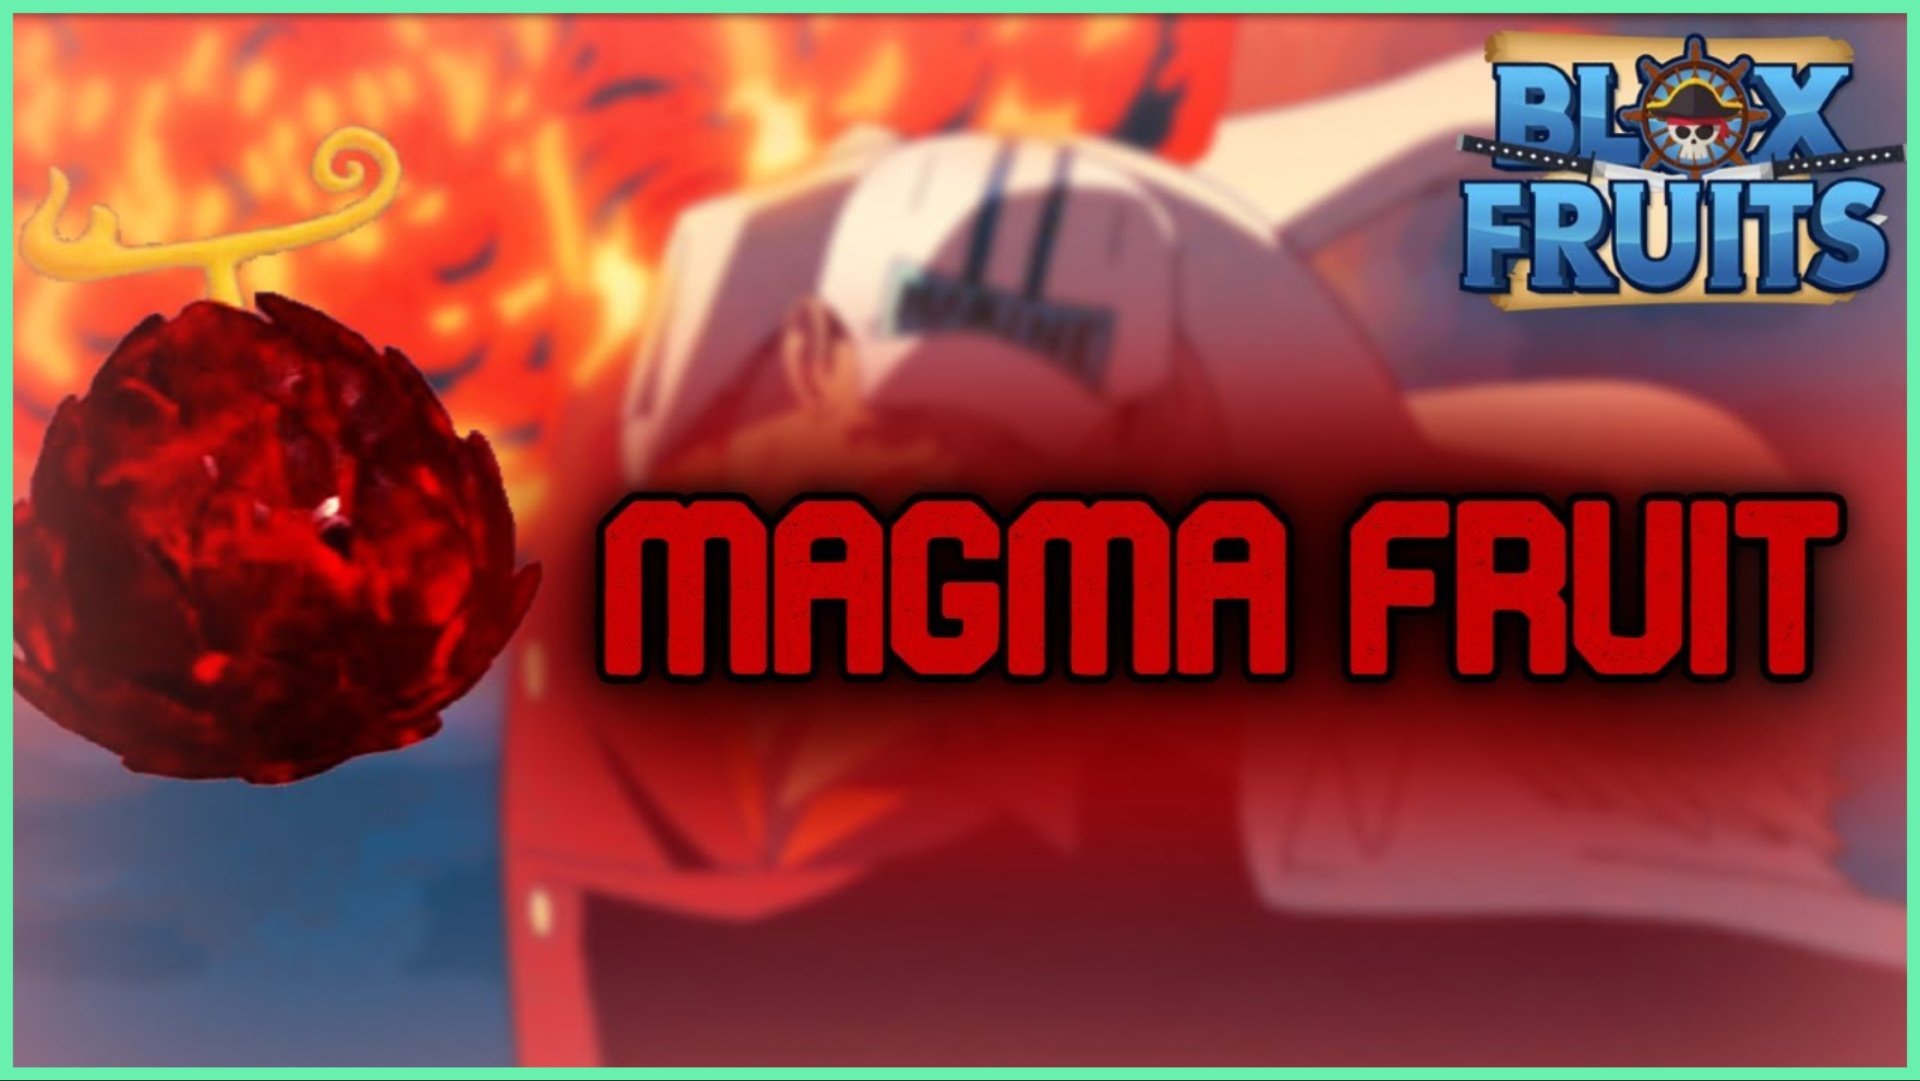 the image shows the magma fruit with the text MAGMA FRUIT next to the fruit in red font. These are placed over a blurred background of mostly red fire like appearance. In the top right corner is the game BLOX FRUITS logo